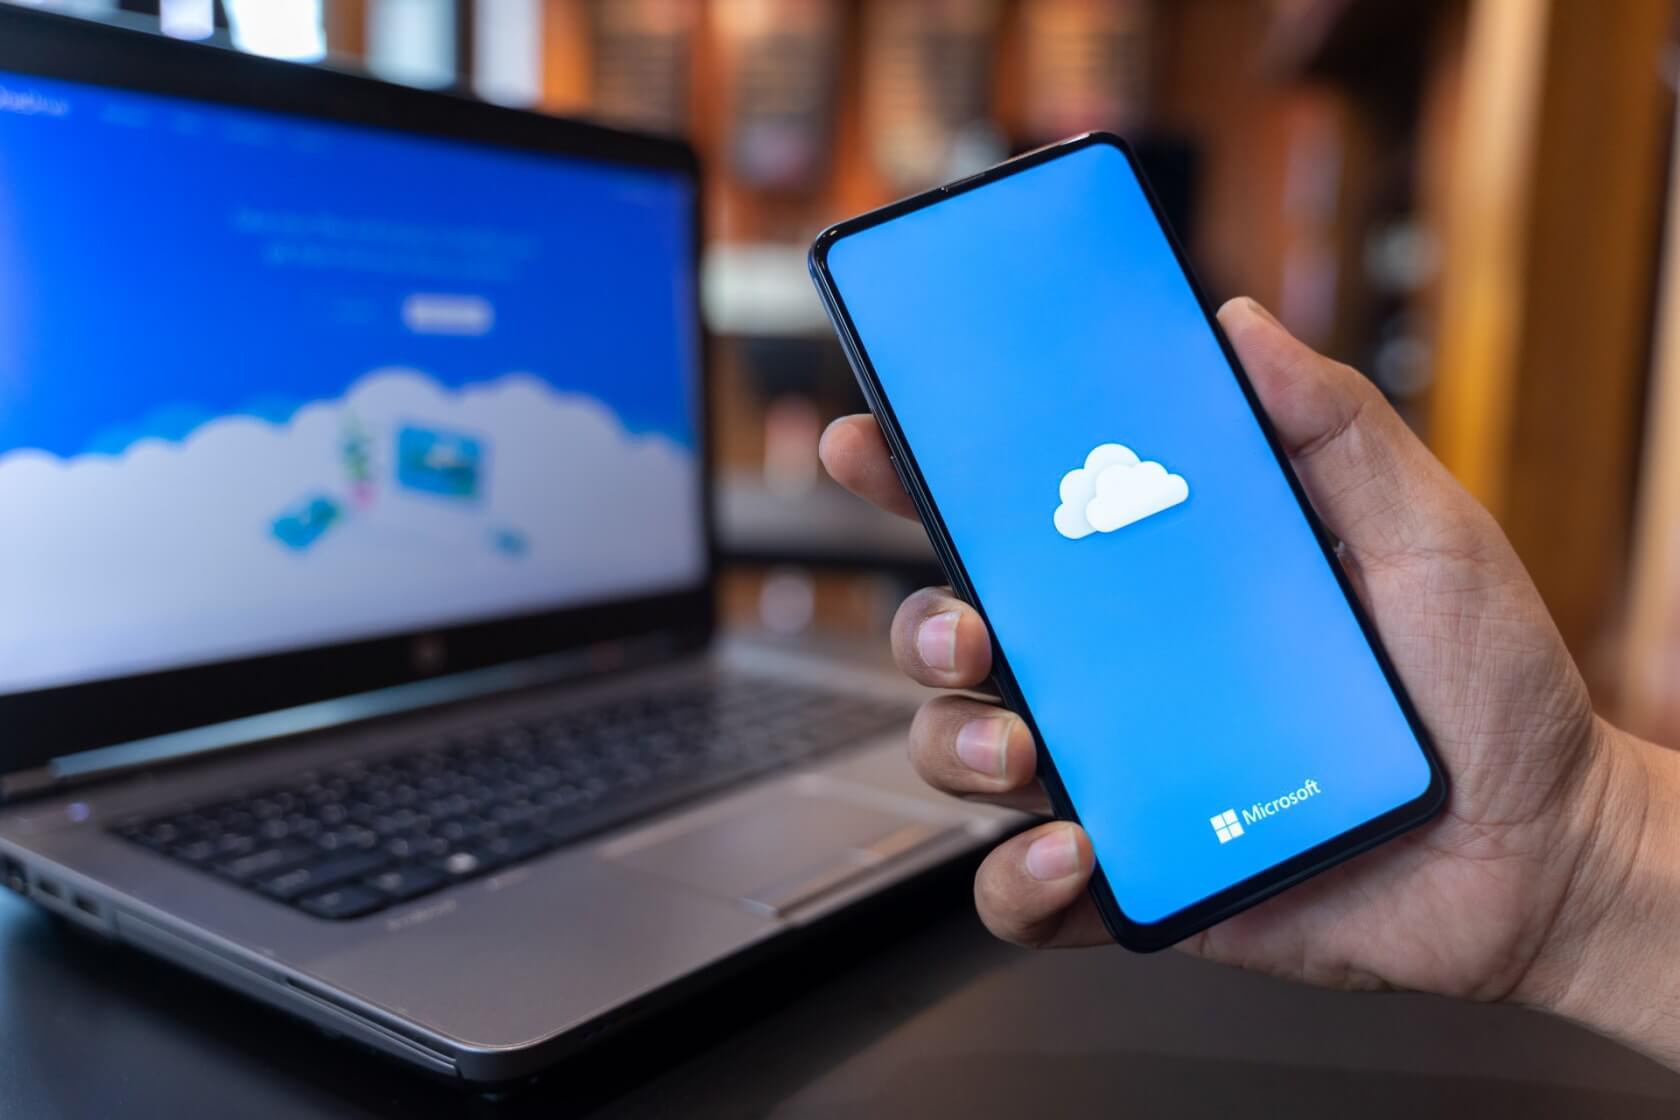 Microsoft is killing off OneDrive's 'Fetch' feature on July 31